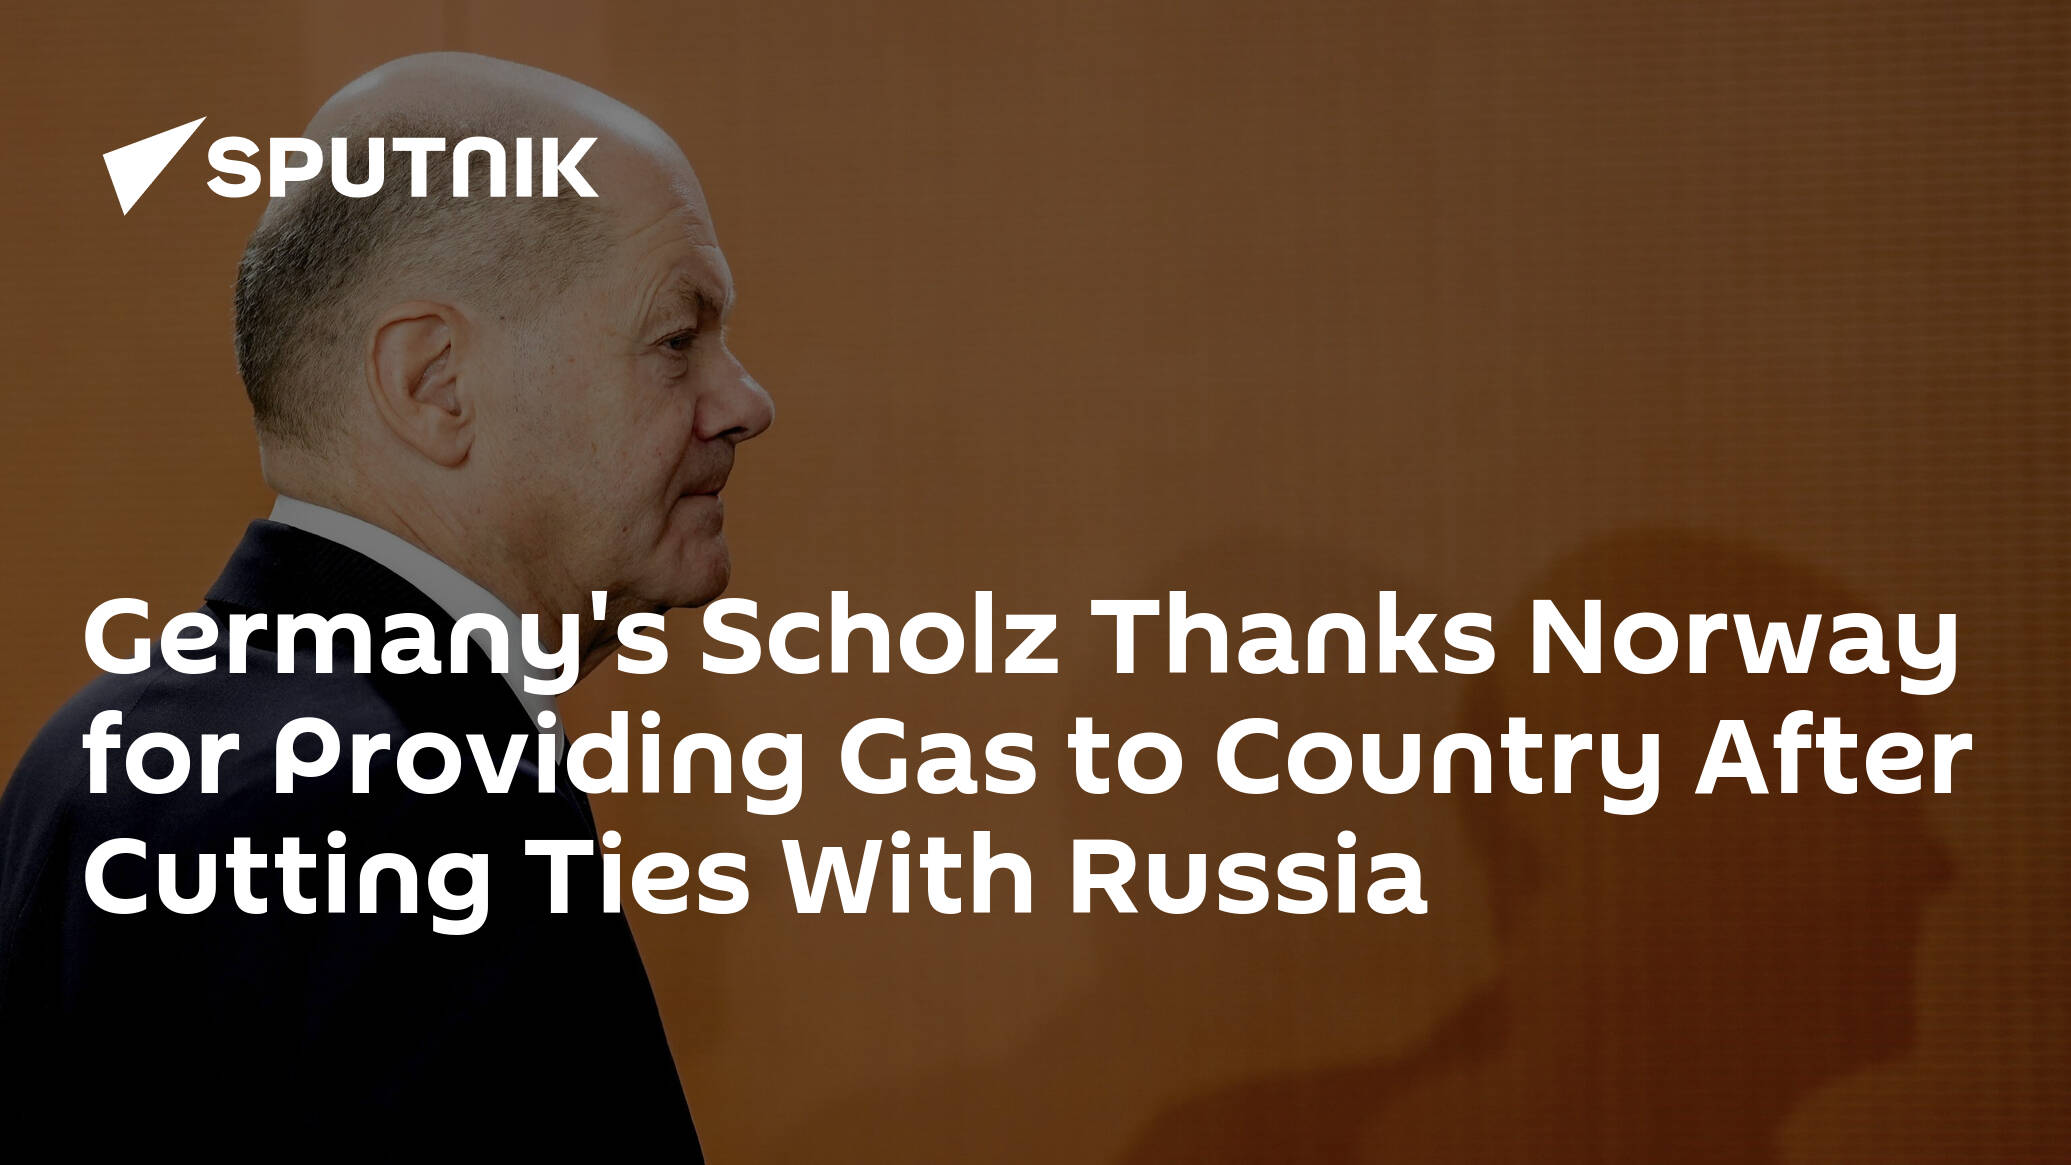 Germany's Scholz Thanks Norway for Providing Gas to Country After Cutting Ties With Russia